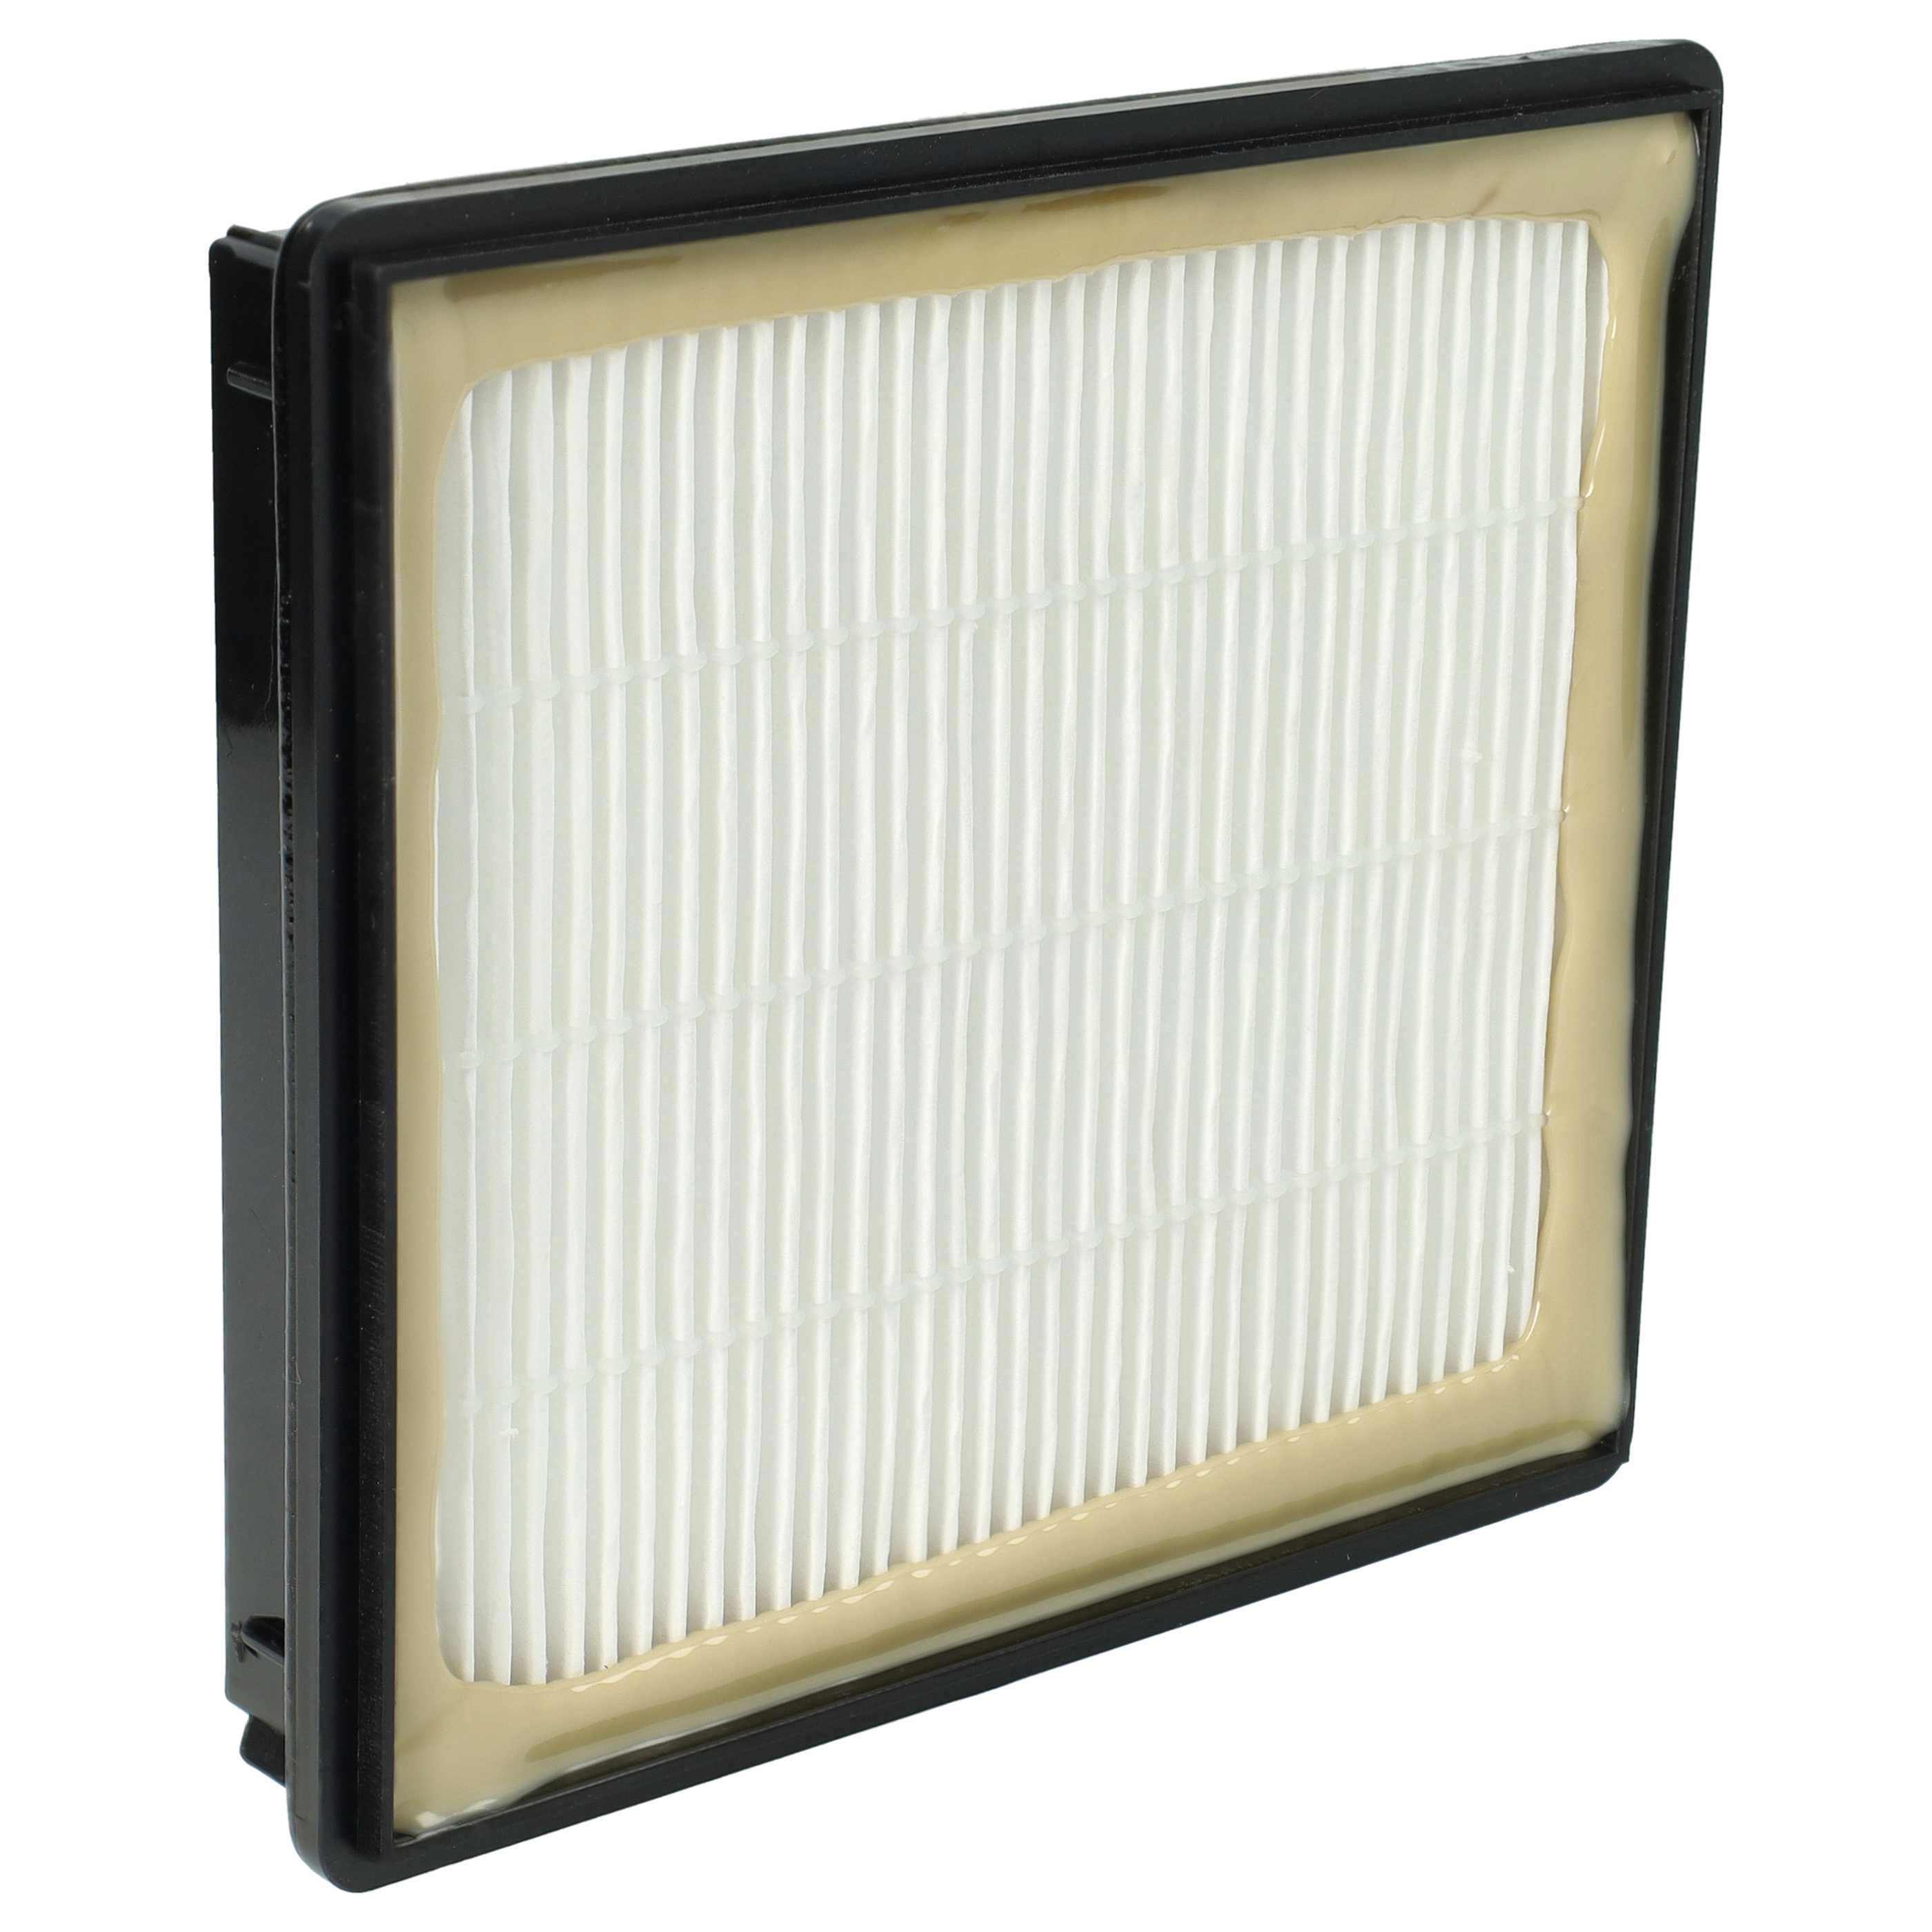 1x HEPA filter replaces Nilfisk 21983000 for Nilfisk Vacuum Cleaner, filter class H14